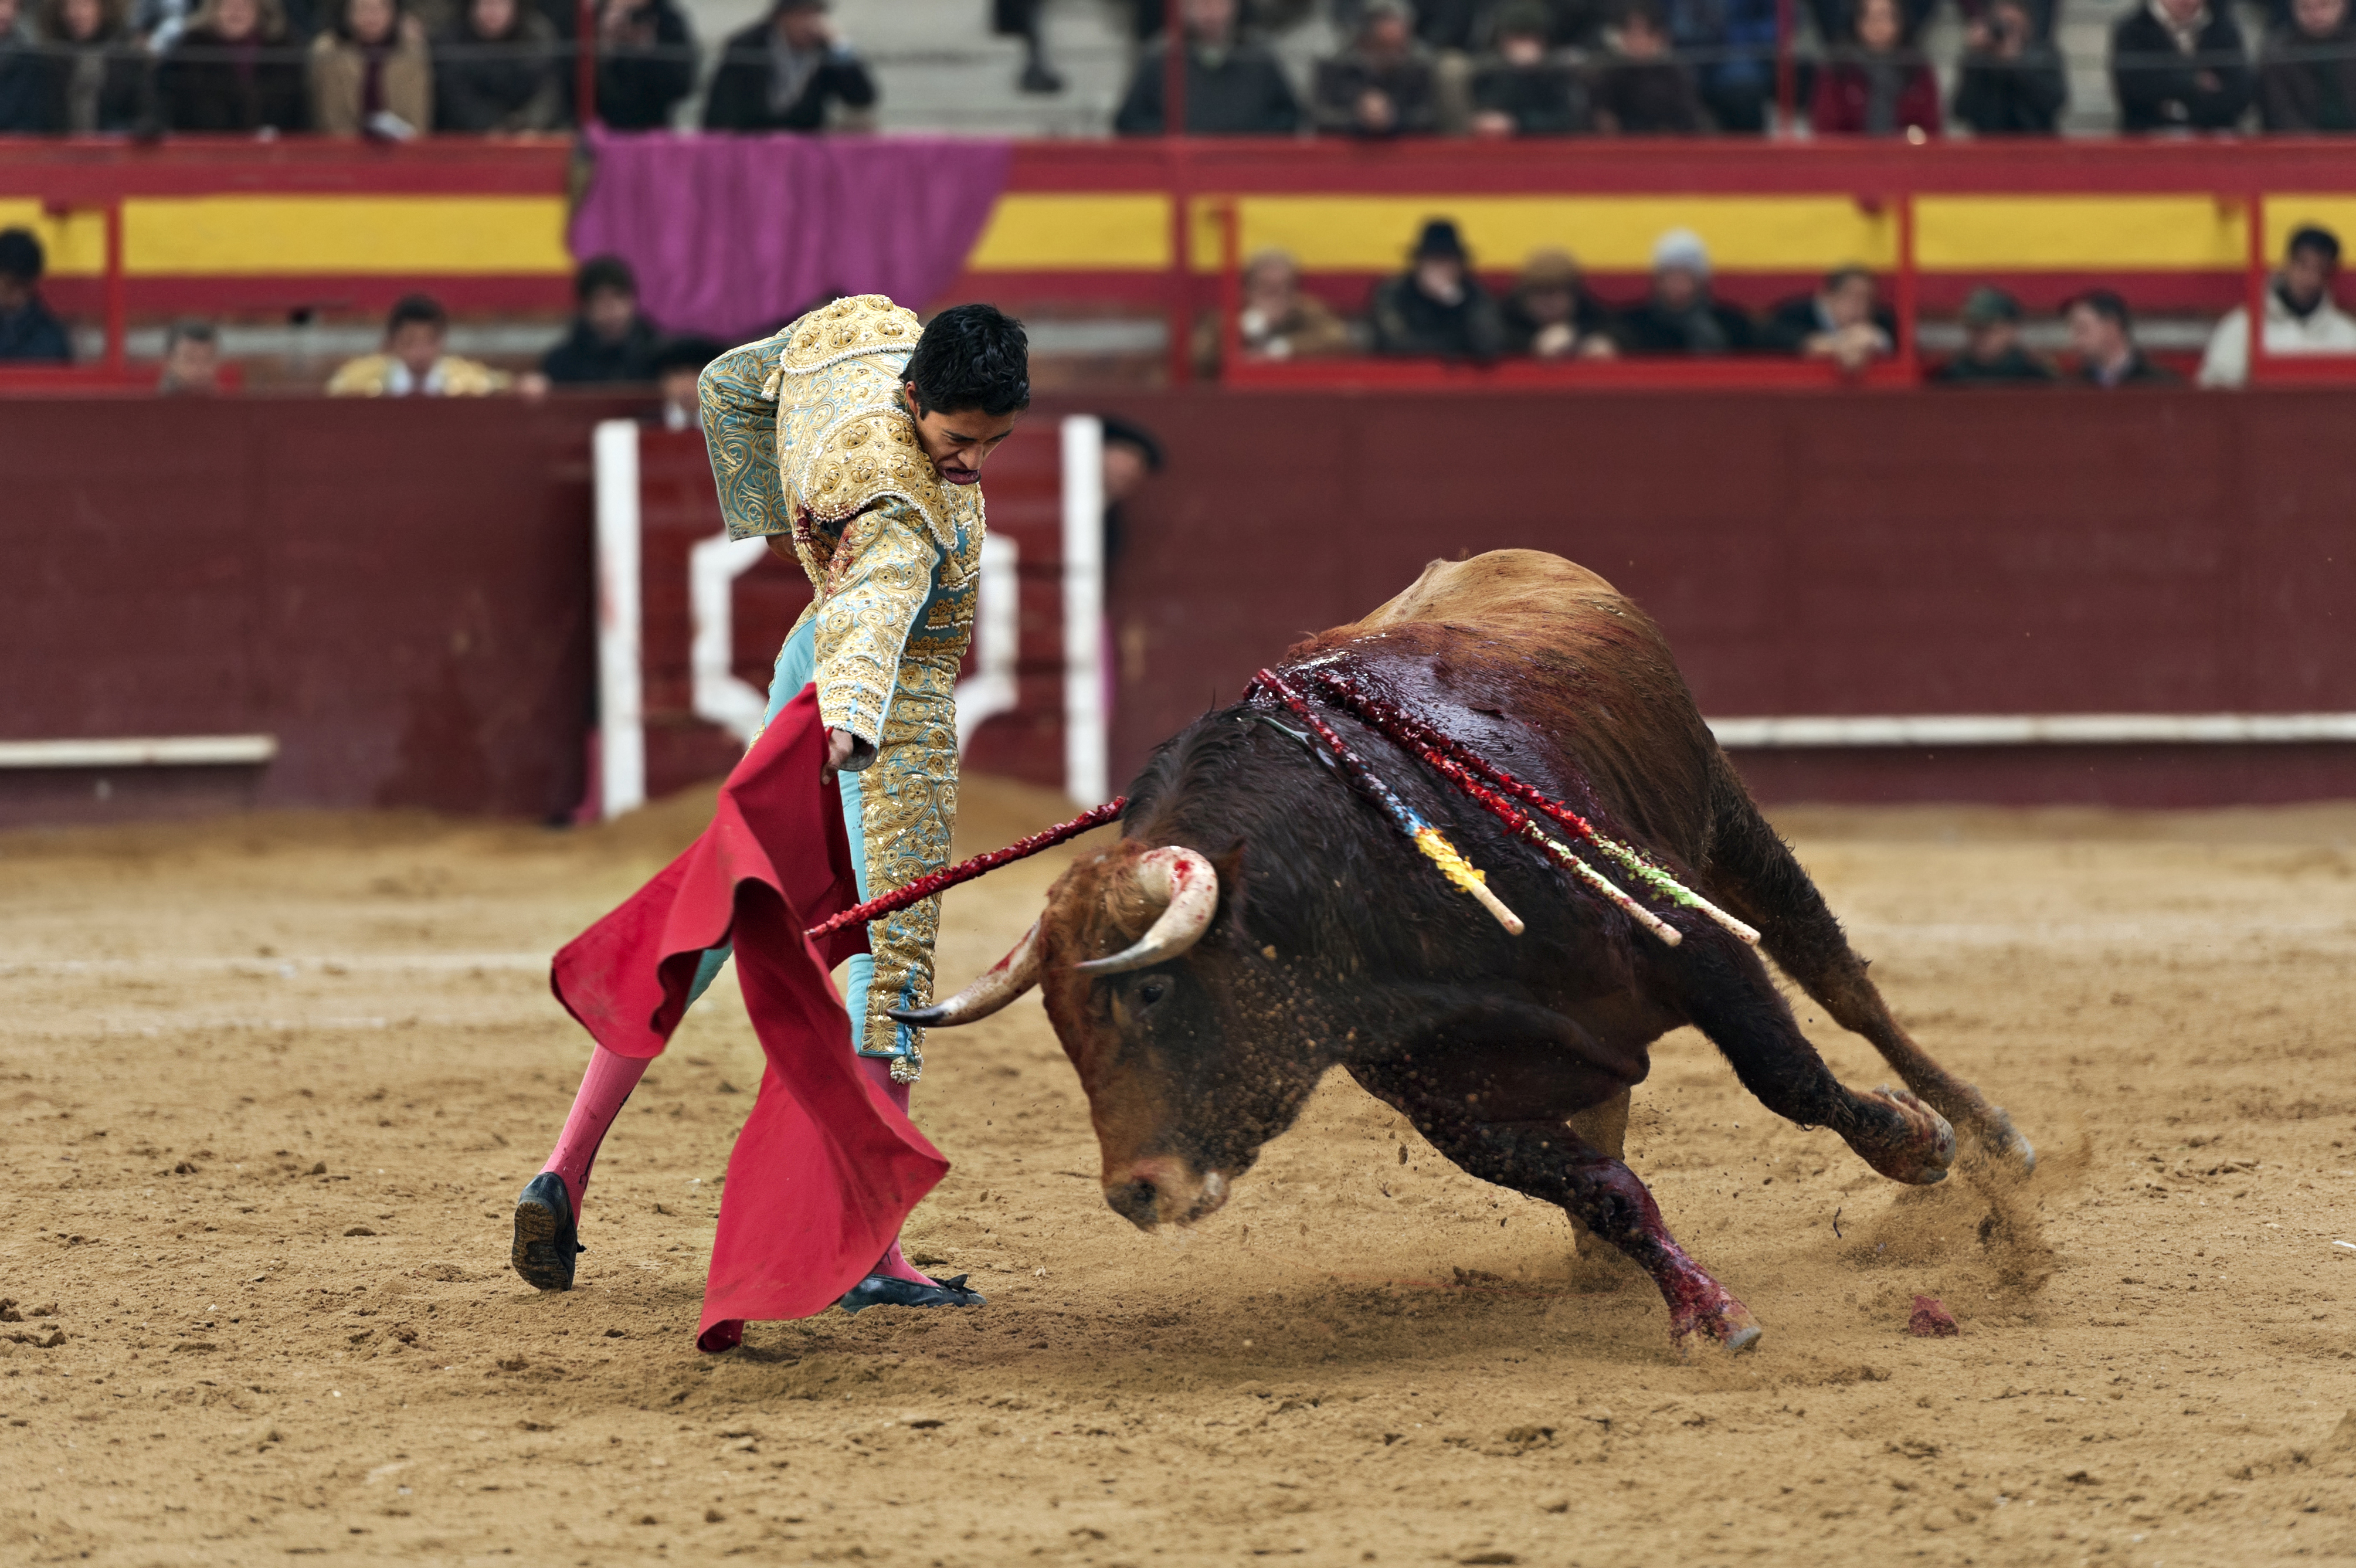 The death of a bull in the ring